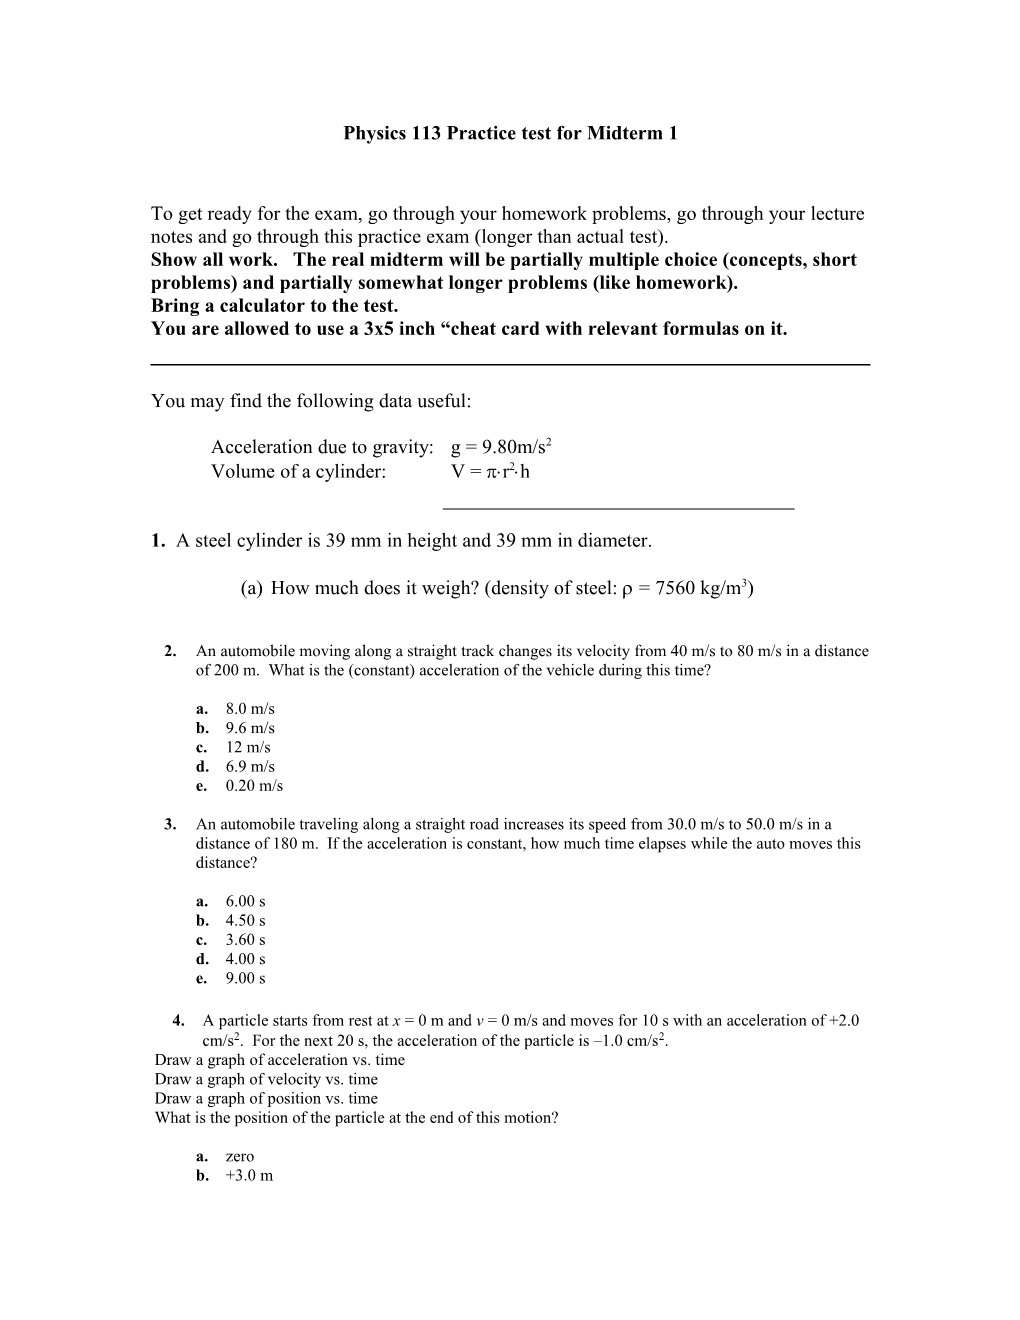 Physics 113 Practice Test for Midterm 1